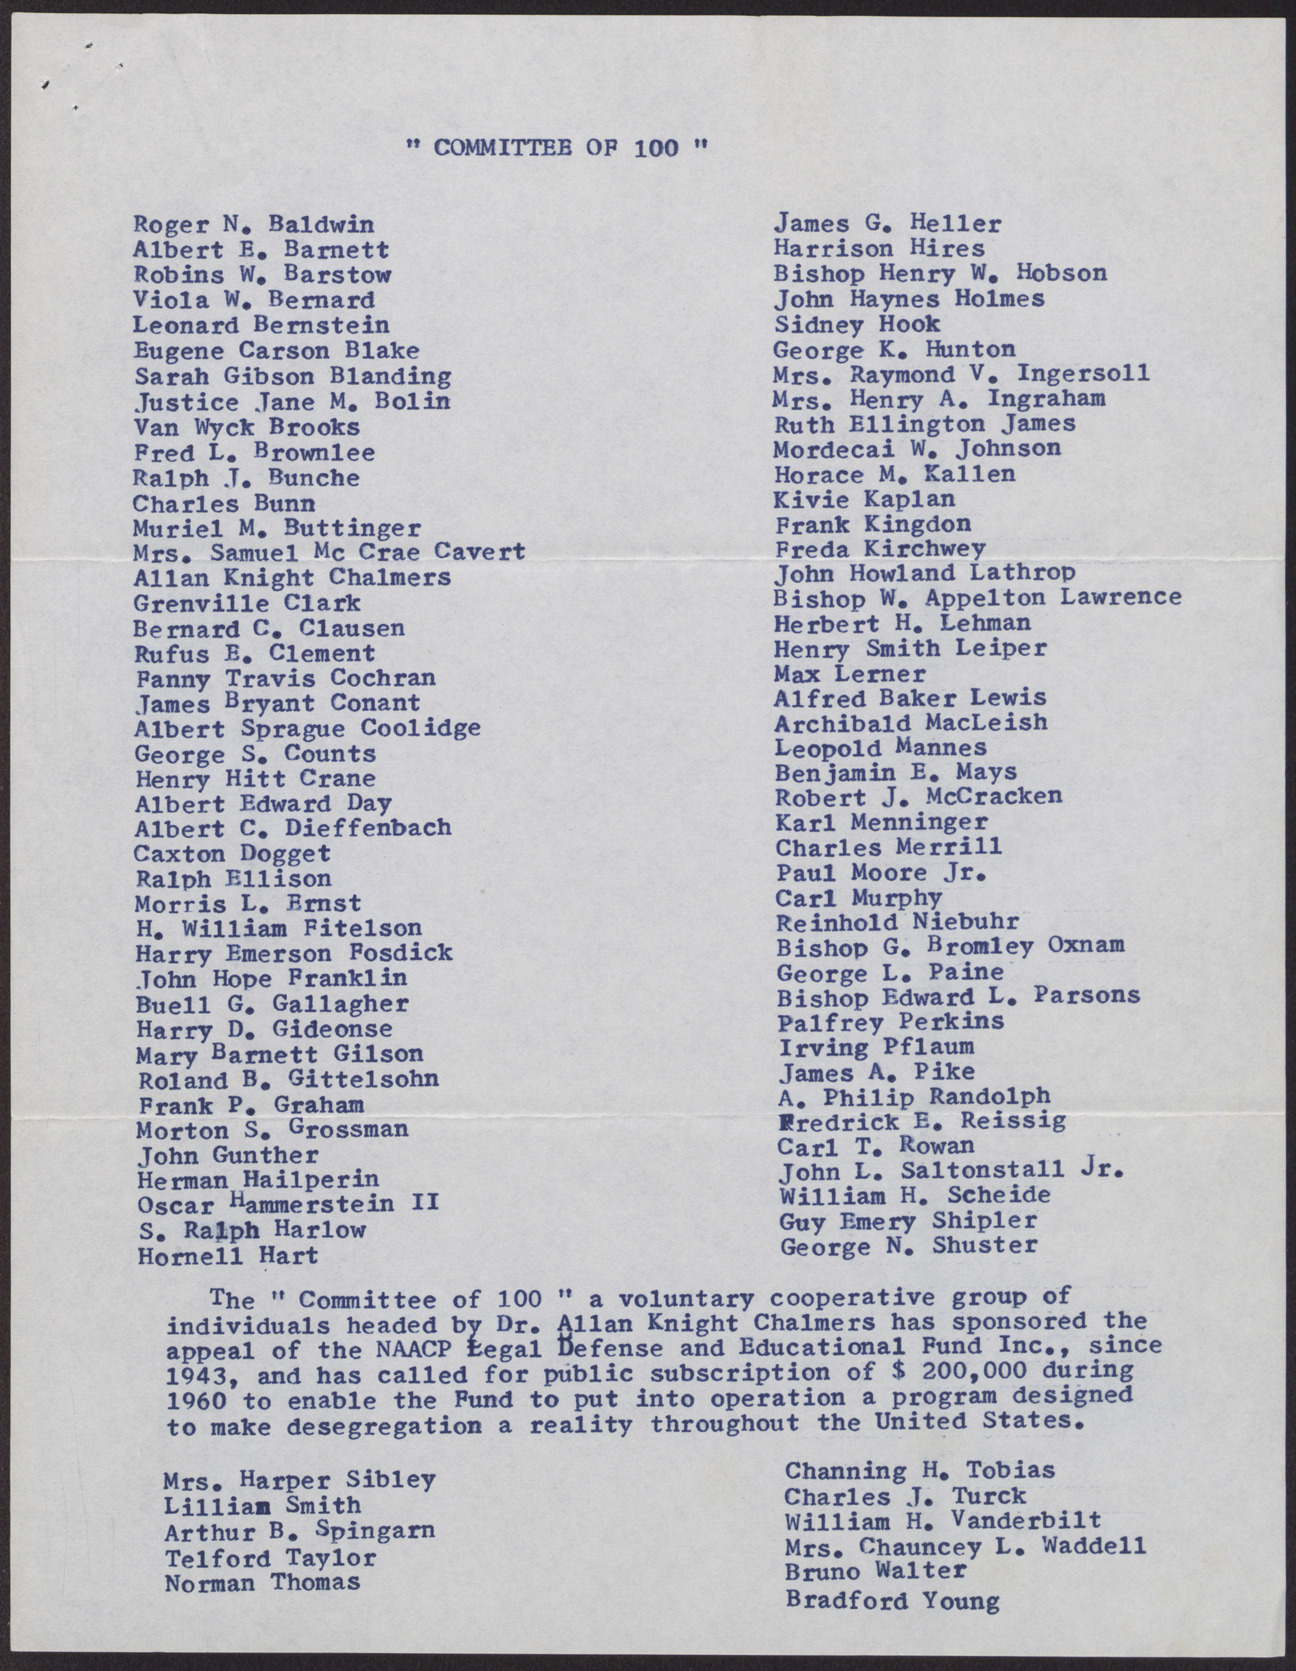 Memo and list of NAACP officers and board directors to Donald Clark from Maggie (3 pages), [1961?], page 3